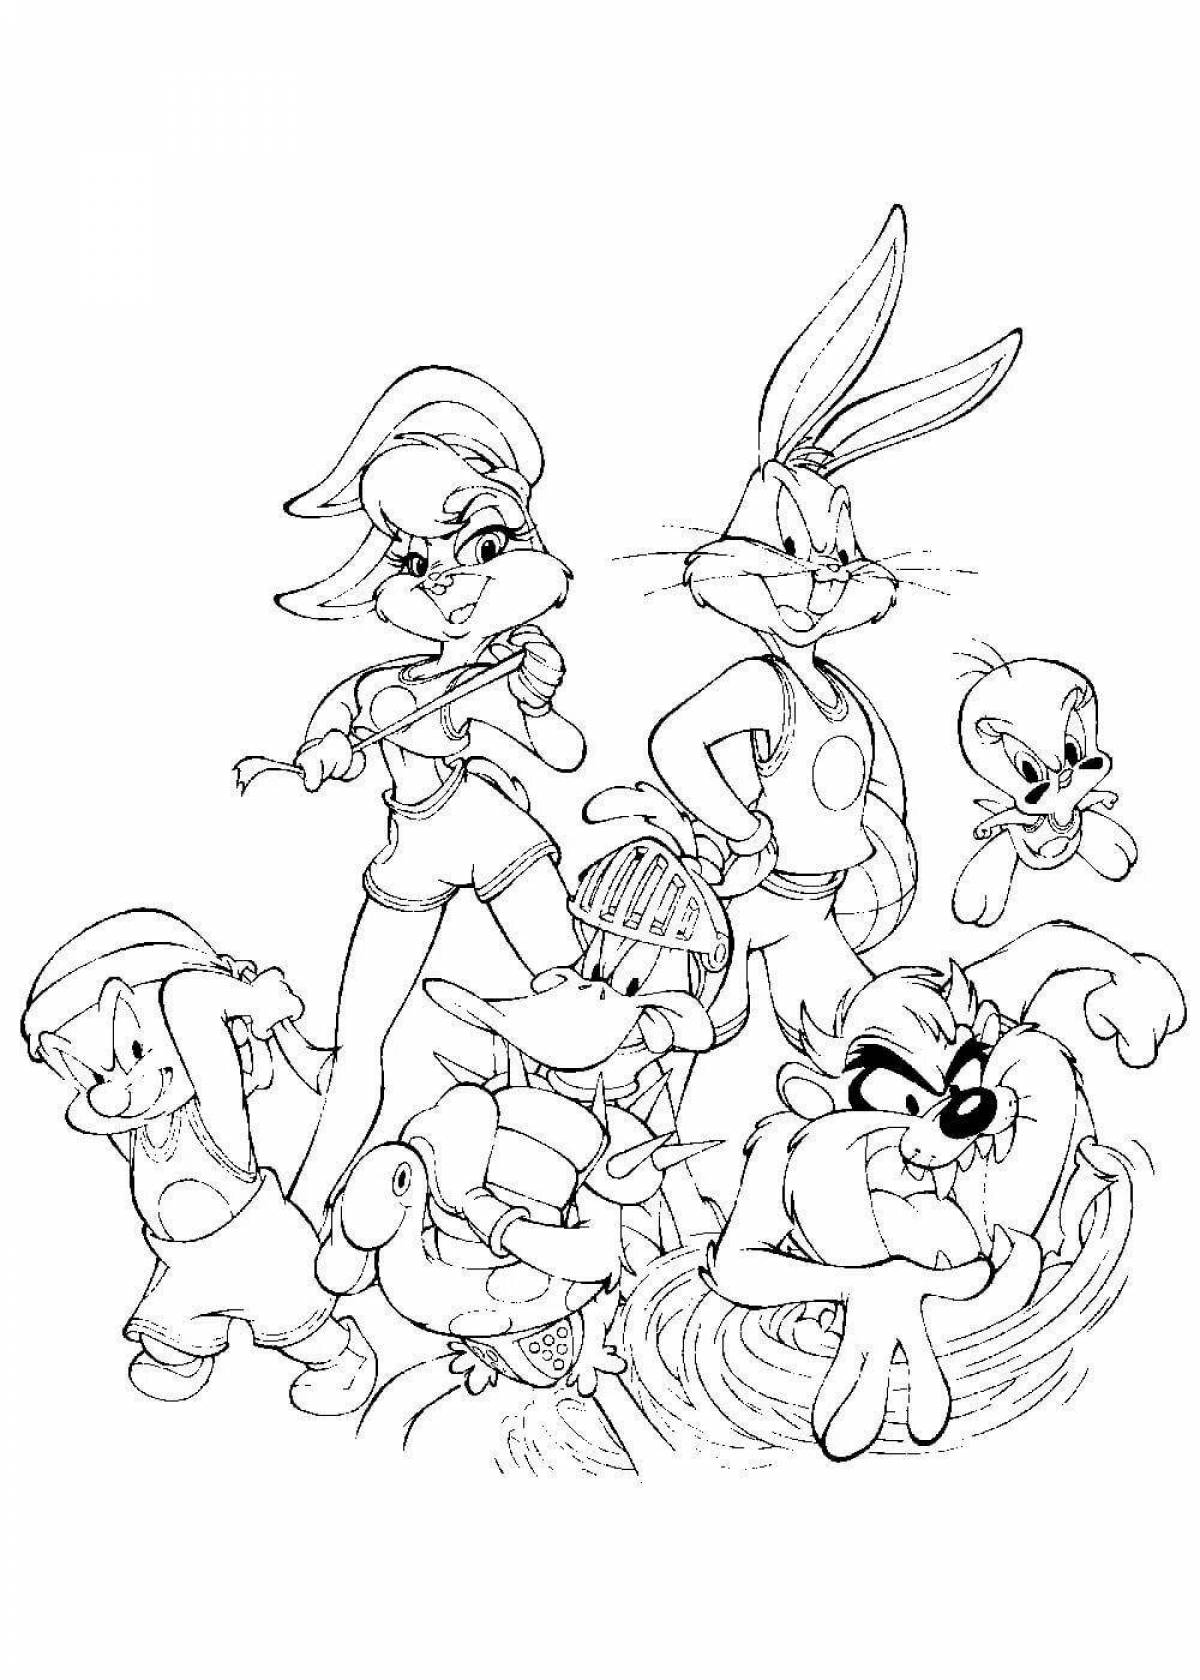 Shiny Space Jam coloring page